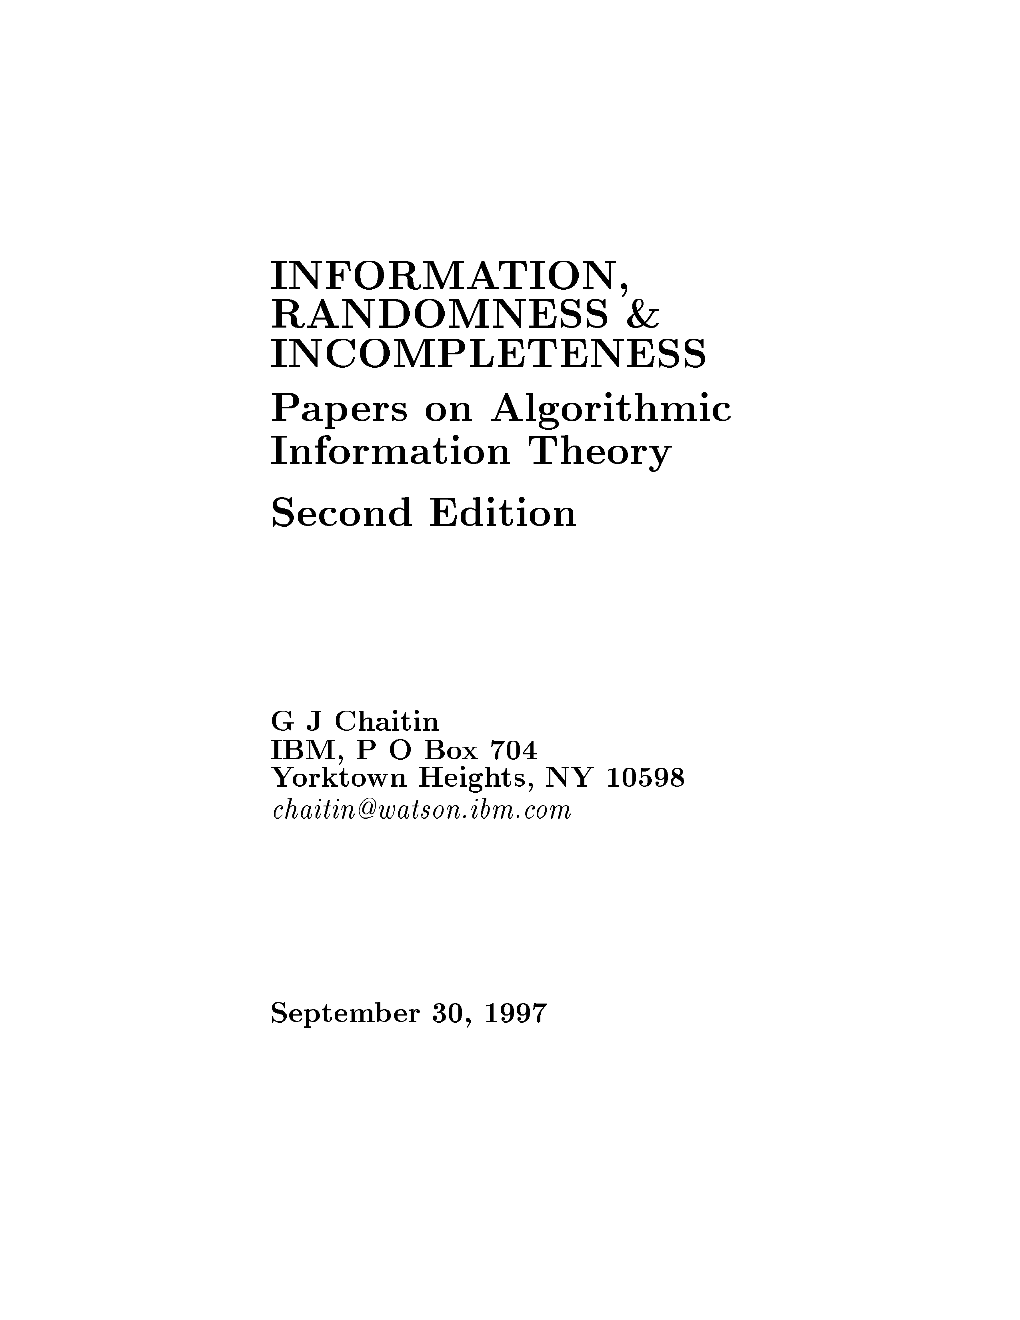 INFORMATION, RANDOMNESS & INCOMPLETENESS Papers On